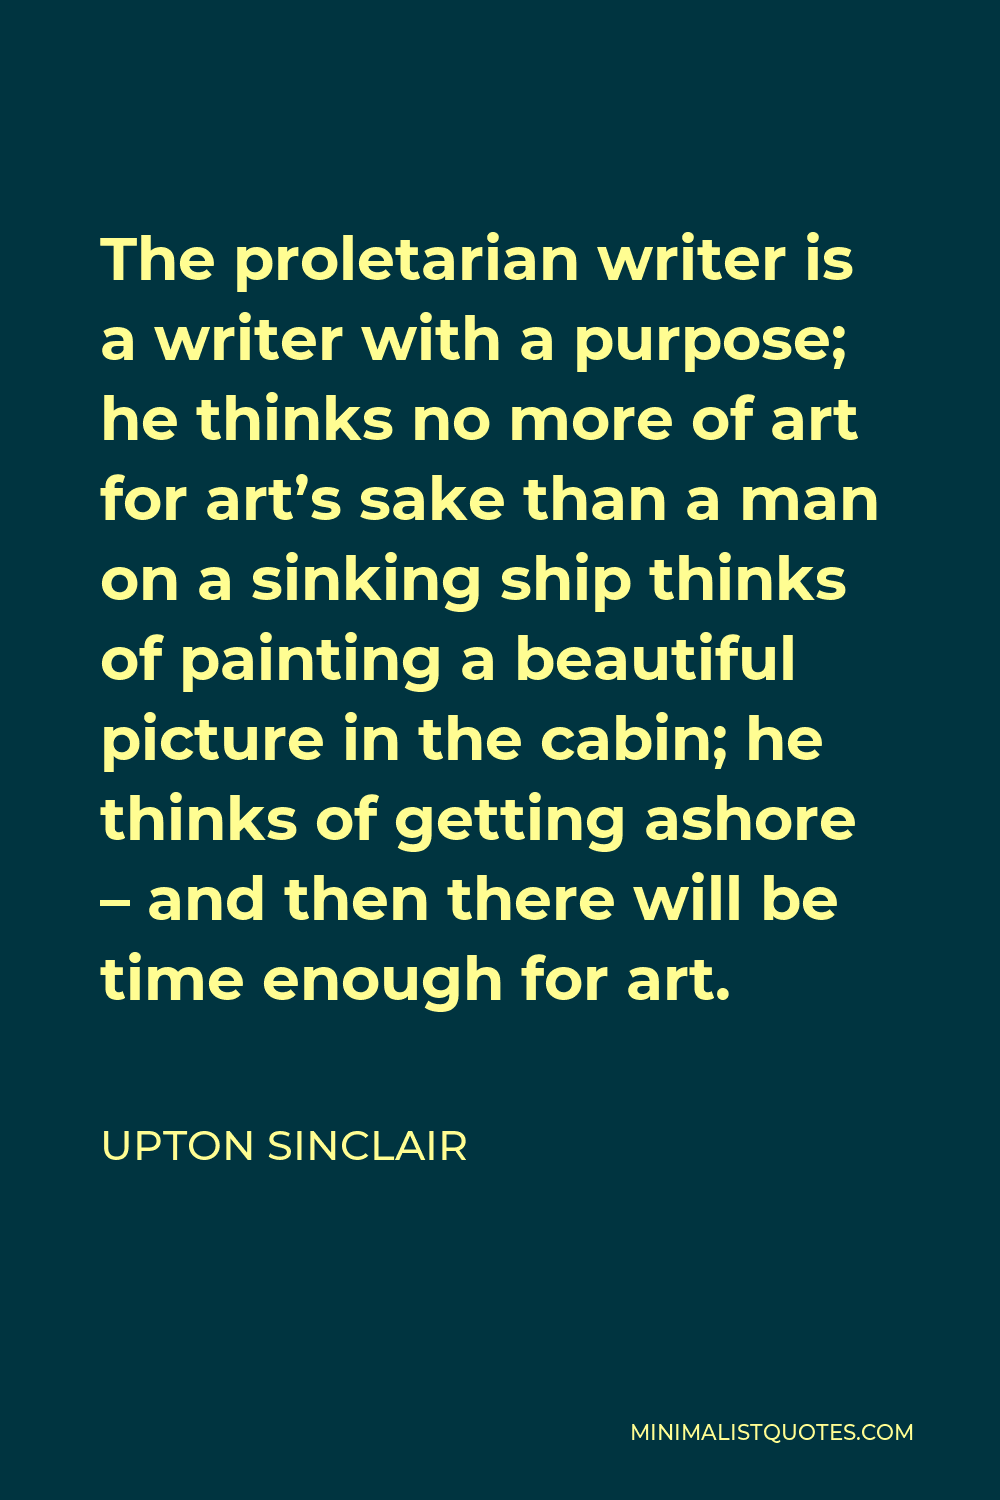 Upton Sinclair Quote - The proletarian writer is a writer with a purpose; he thinks no more of art for art’s sake than a man on a sinking ship thinks of painting a beautiful picture in the cabin; he thinks of getting ashore – and then there will be time enough for art.